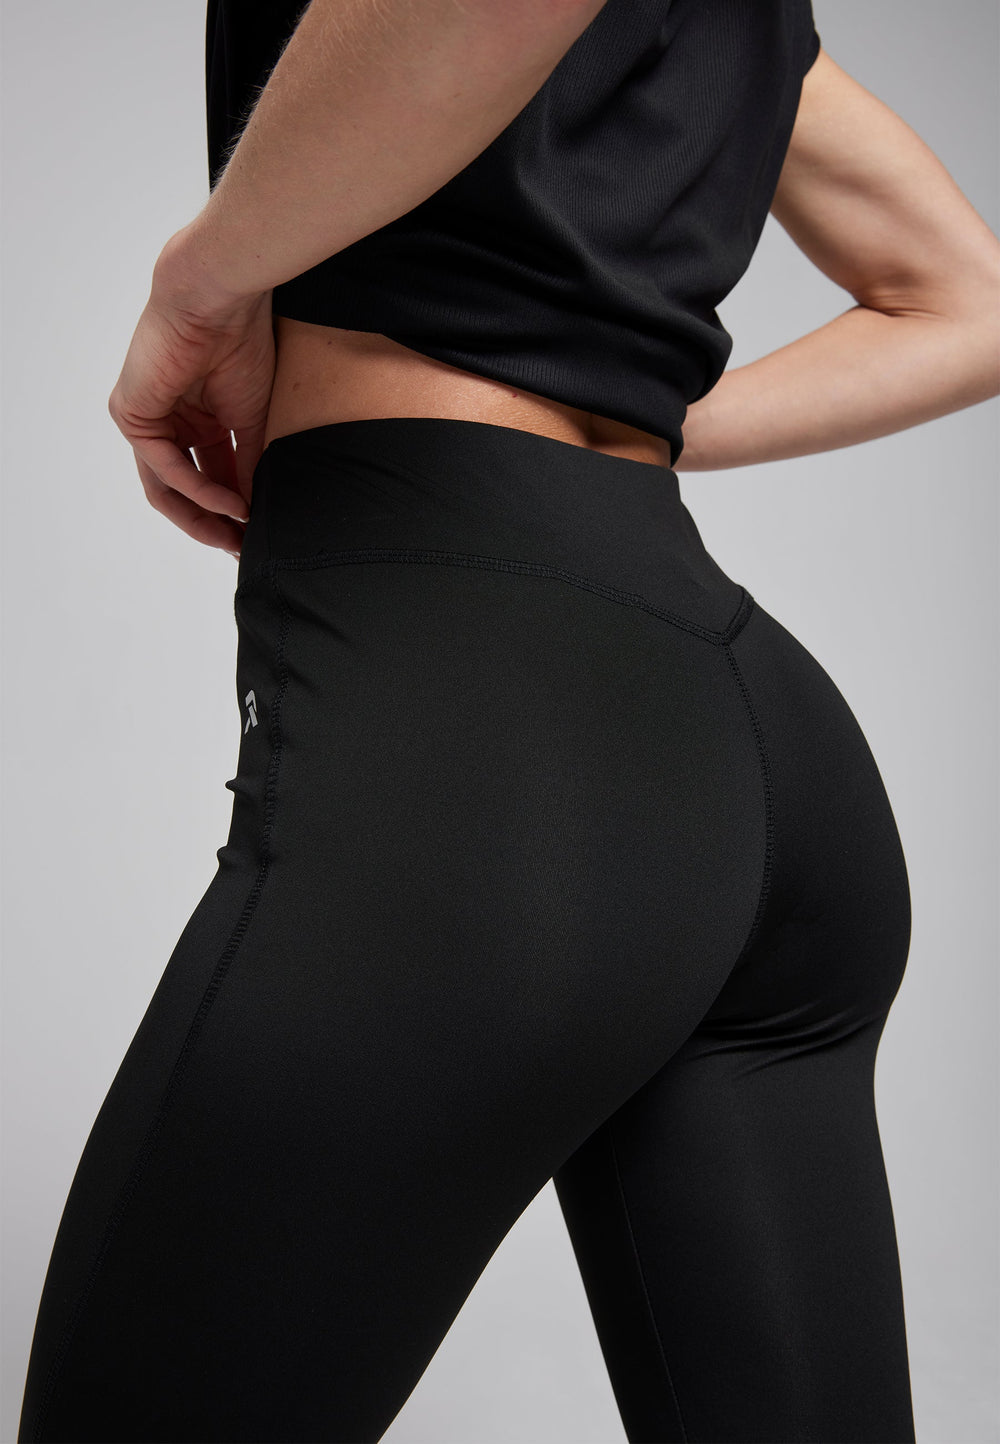 Women's sports legging Dry-Cool - sustainable